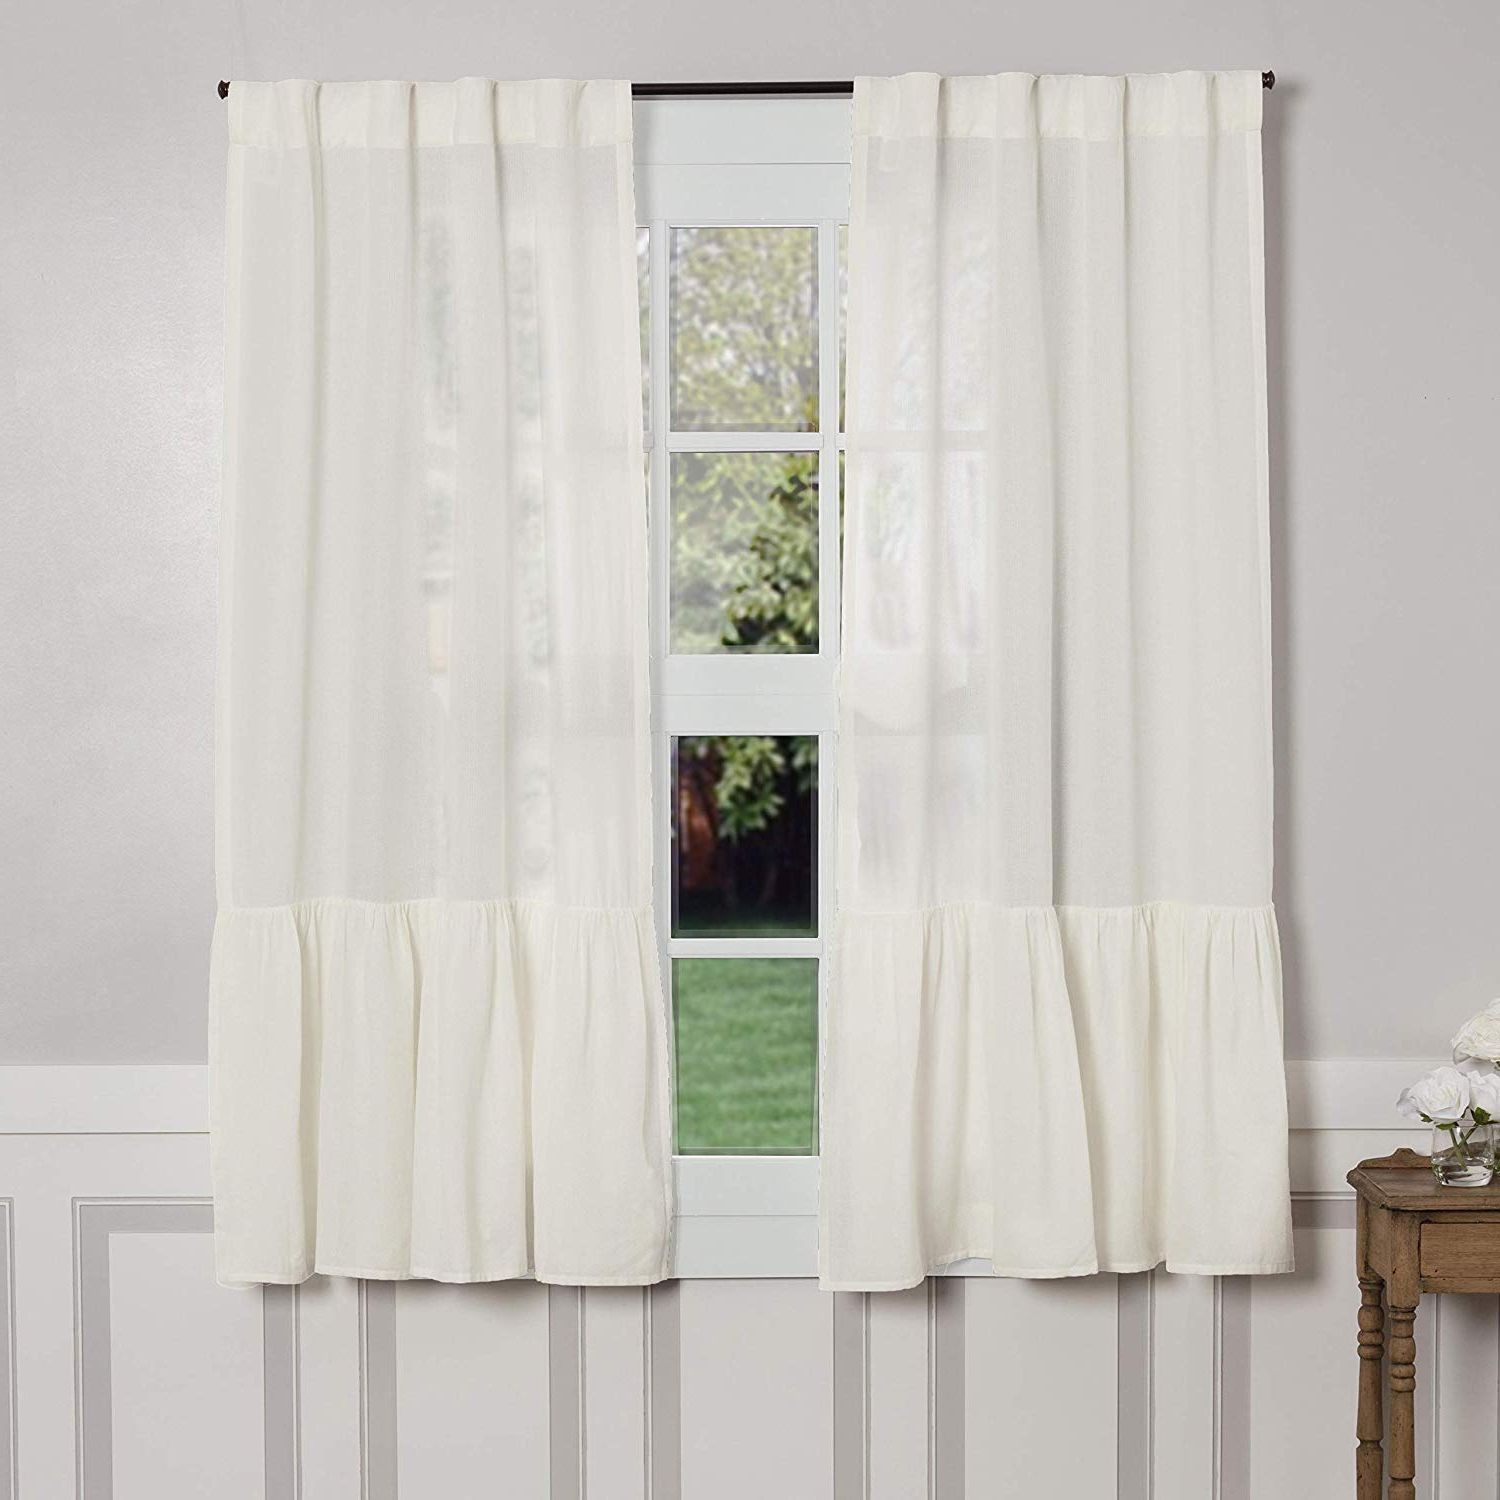 Rod Pocket Cotton Solid Color Ruched Ruffle Kitchen Curtains Intended For Latest Piper Classics Annabelle High Ruffle Panel Curtains, Set Of 2, 63" Long,  Antique Soft White, Semi Sheer, Vintage Farmhouse Chic Style Drapes (View 11 of 20)